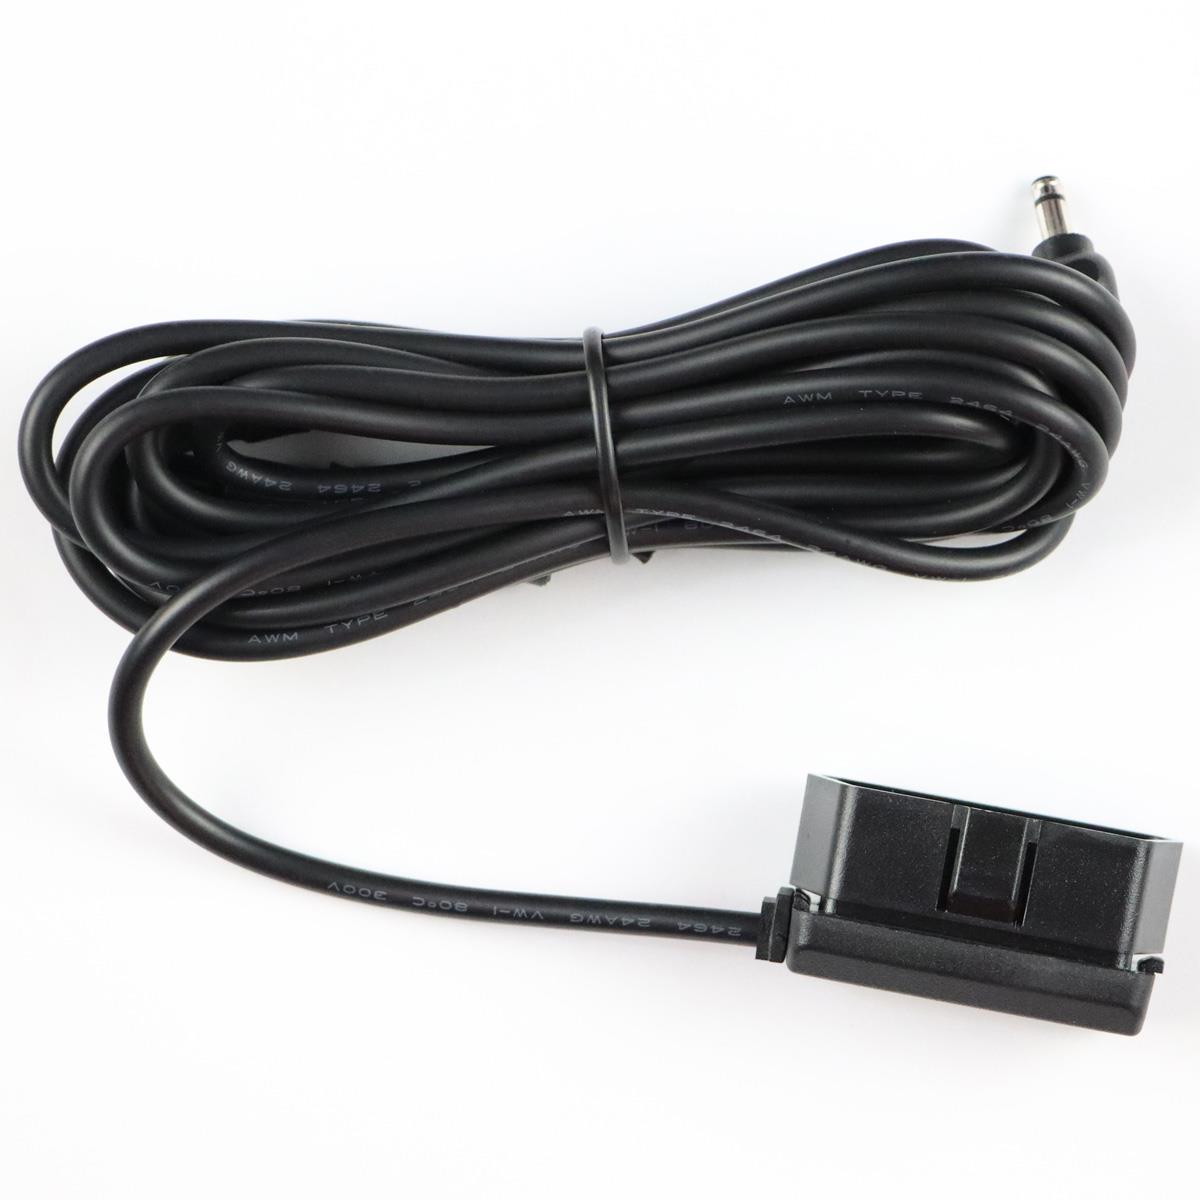 Image of Thinkware OBD-II Power Cable for Dash Cameras